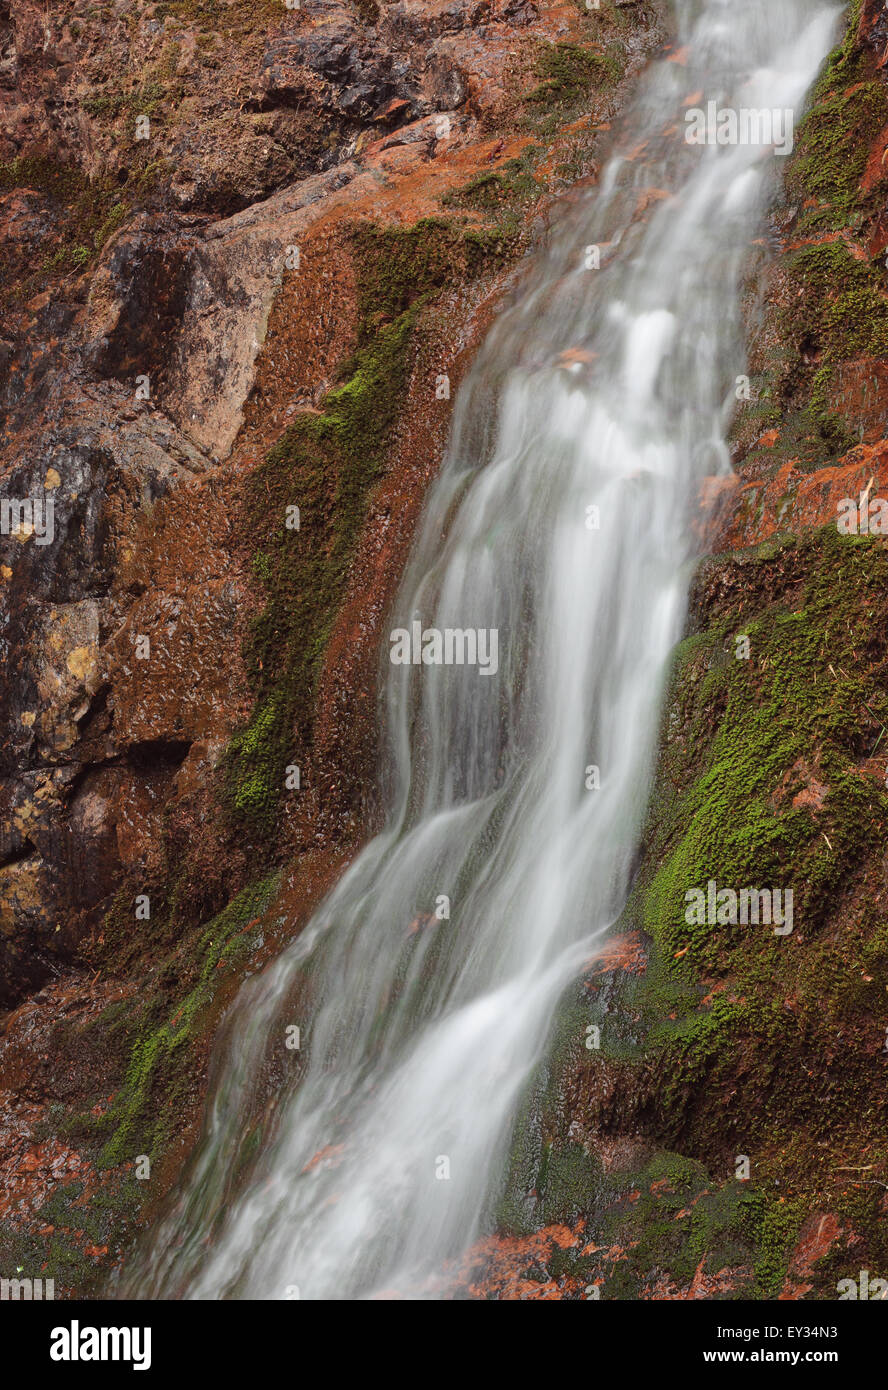 Small flowing waterfall detail. Stock Photo